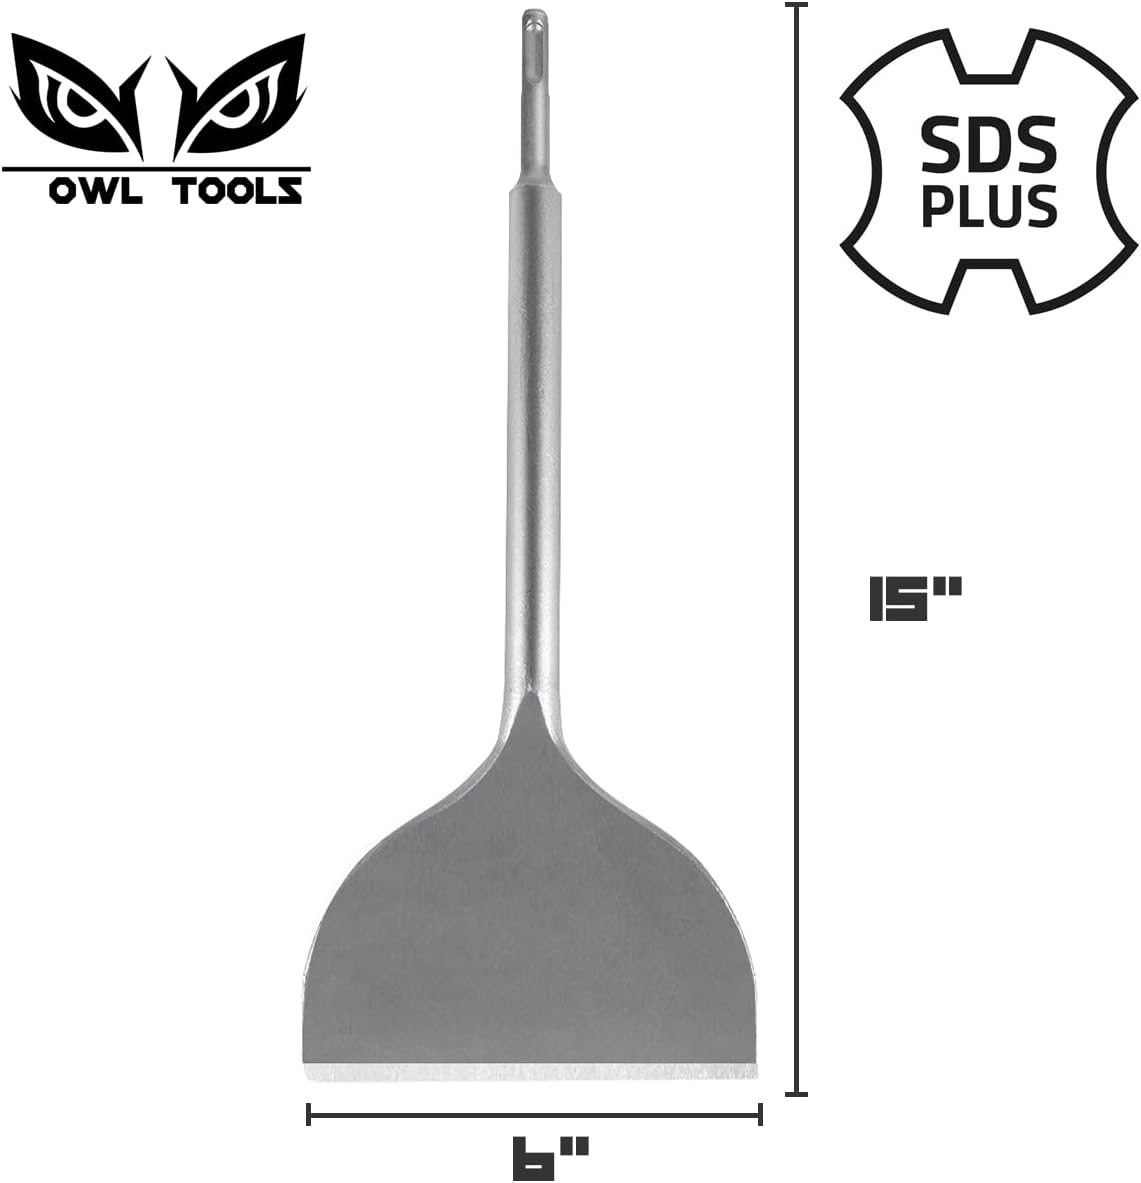 Owl Tools 6" Wide SDS Plus Chisel Bit (Industrial Grade - 6" x 14") Tile Grout Thinset Removal Tool - Compatible with All SDS Plus Impact Rotary Hammers